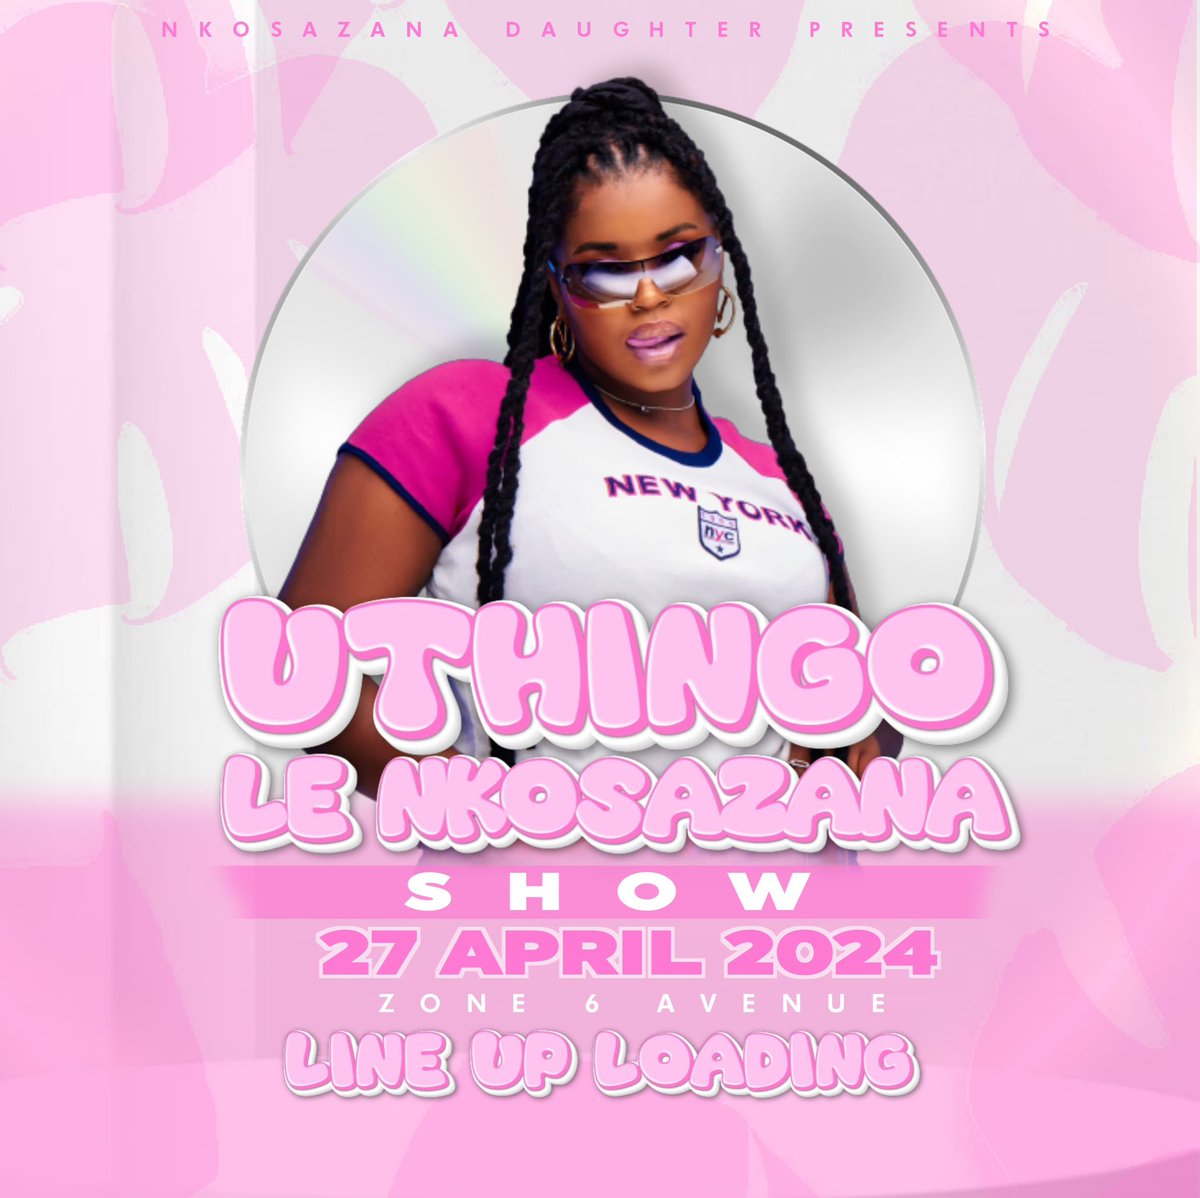 I’m so excited to announce UTHINGO LENKOSAZANA SHOW happening at ZONE 6 VANUE ON THE 27TH OF APRIL 😫❤️ line up coming soon 🥰❤️come in numbers ❤️